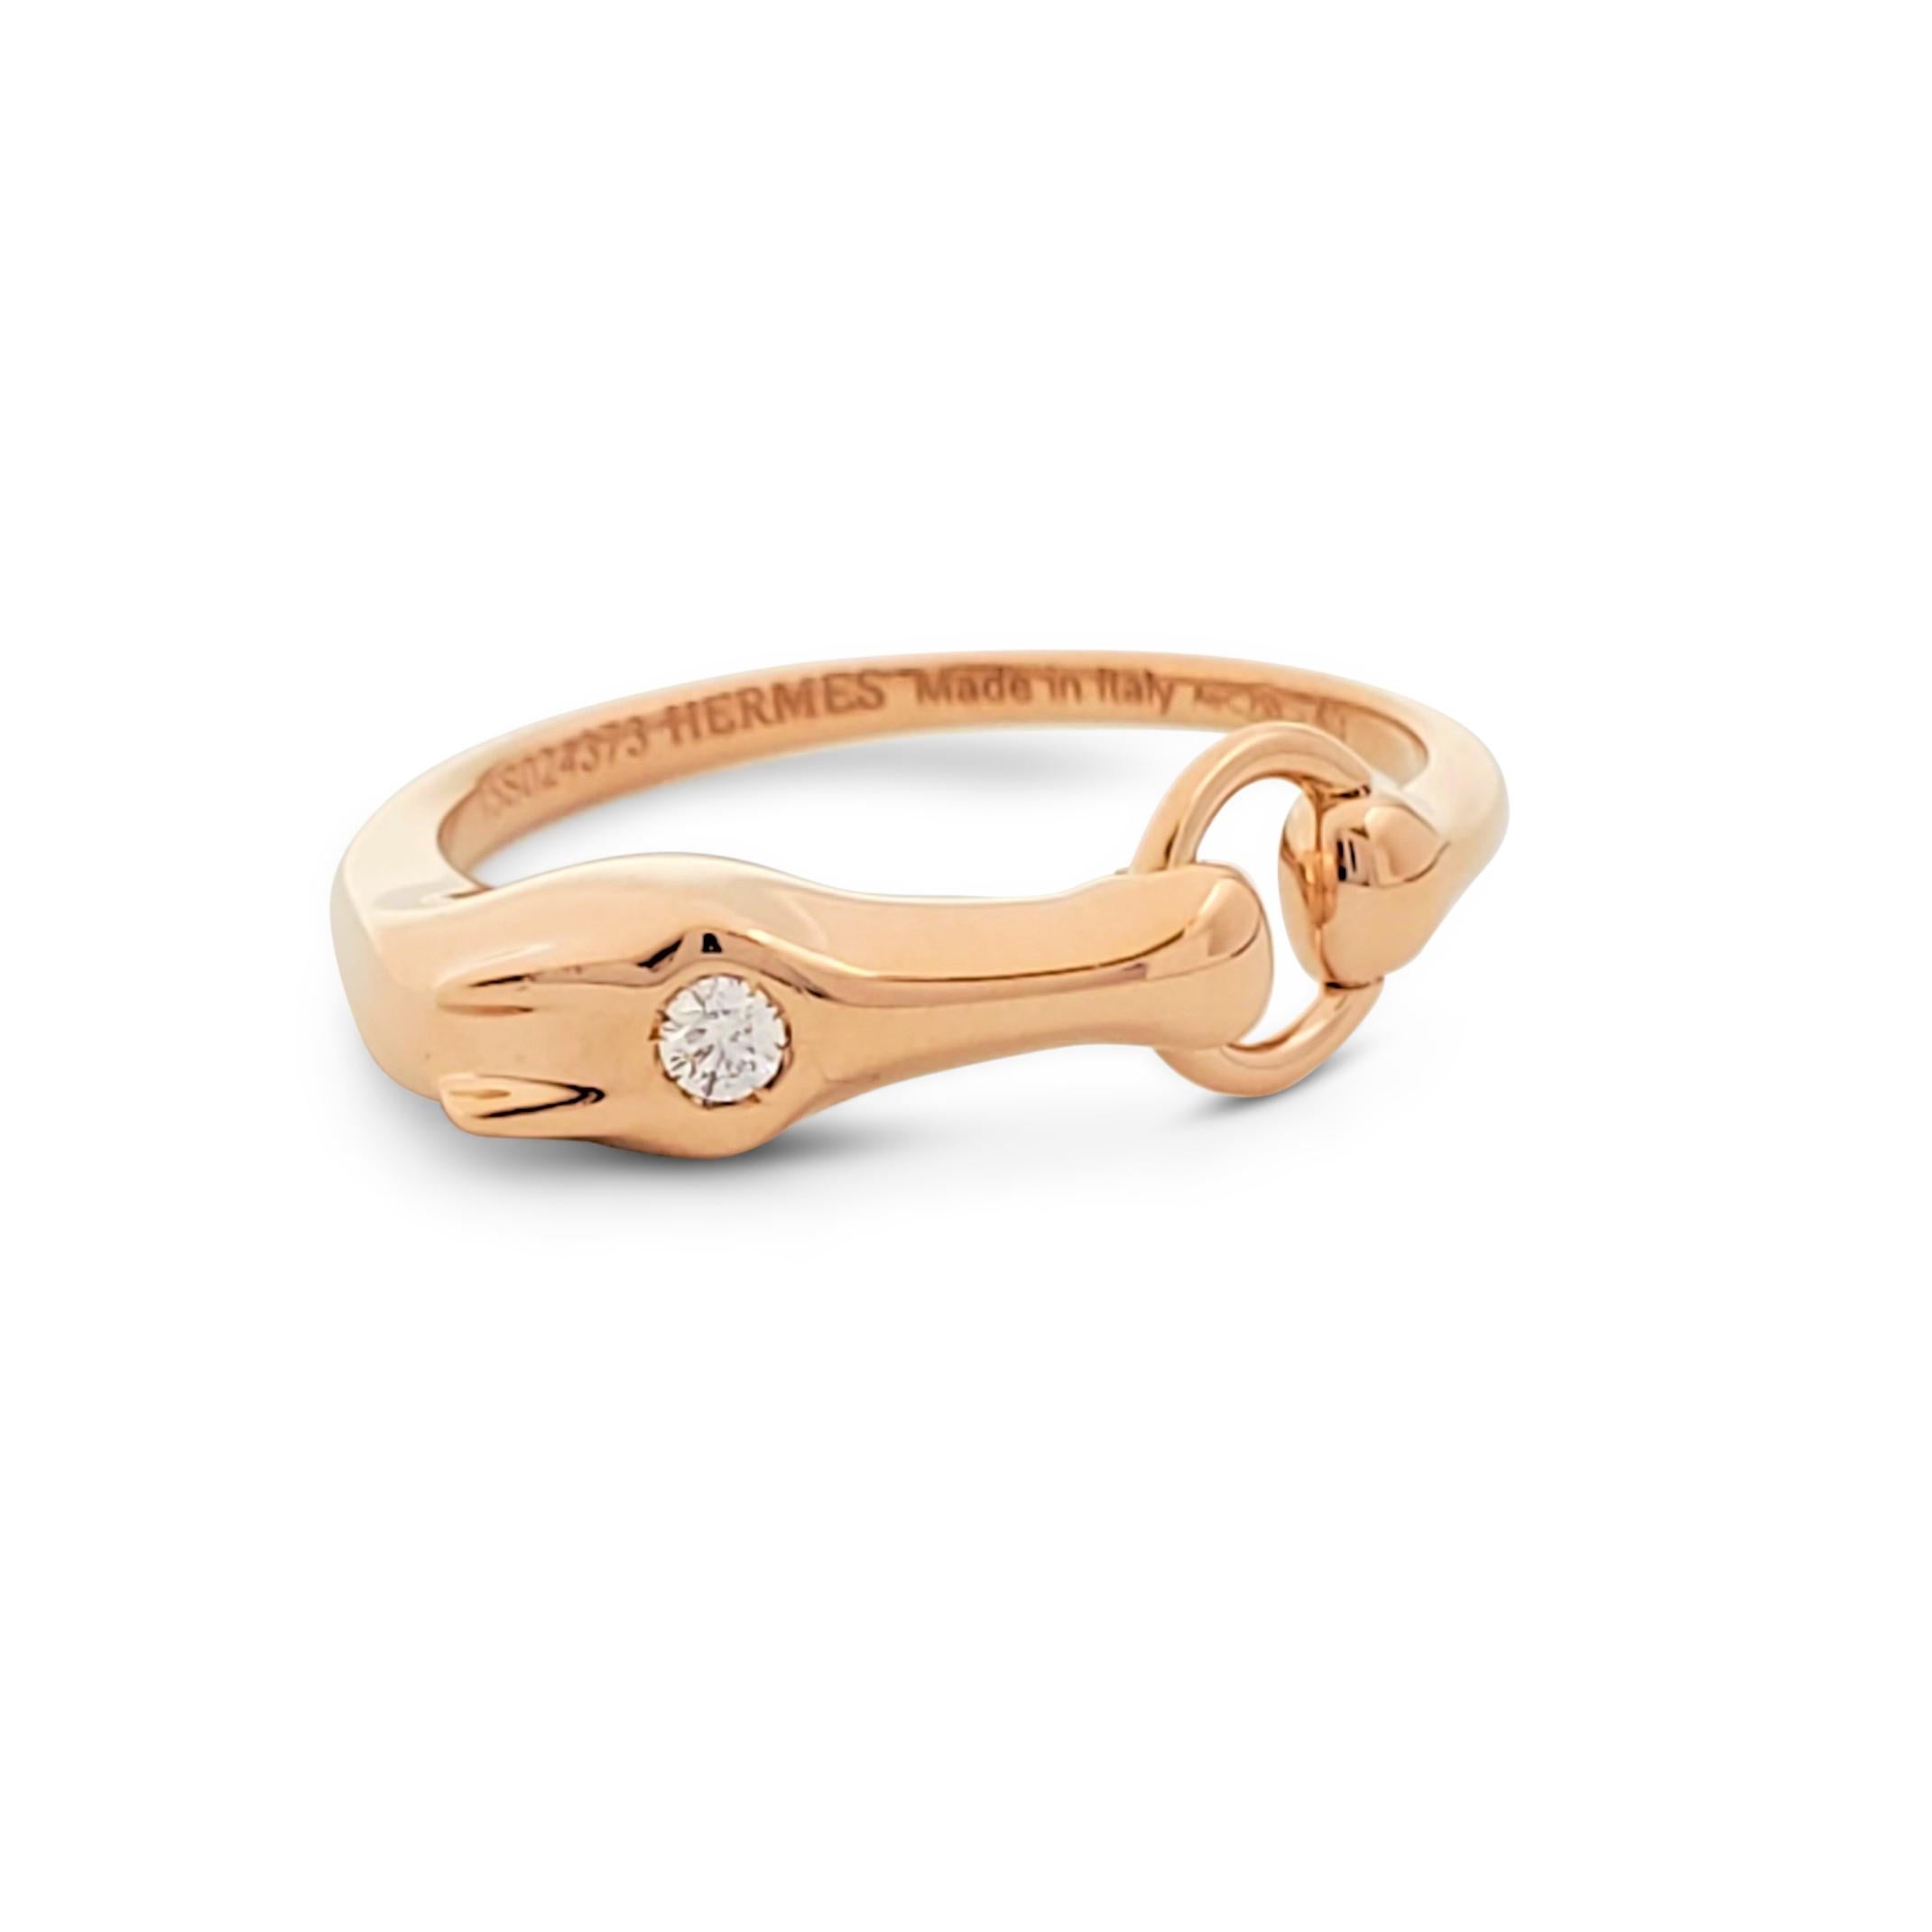 Authentic Hermes 'Galop' ring crafted in 18 karat rose gold and set with one round brilliant cut diamond. TPM (Very small model). Signed Hermes, Made in Italy, Au750, 49, with serial number. The ring is not presented with the original box or papers.